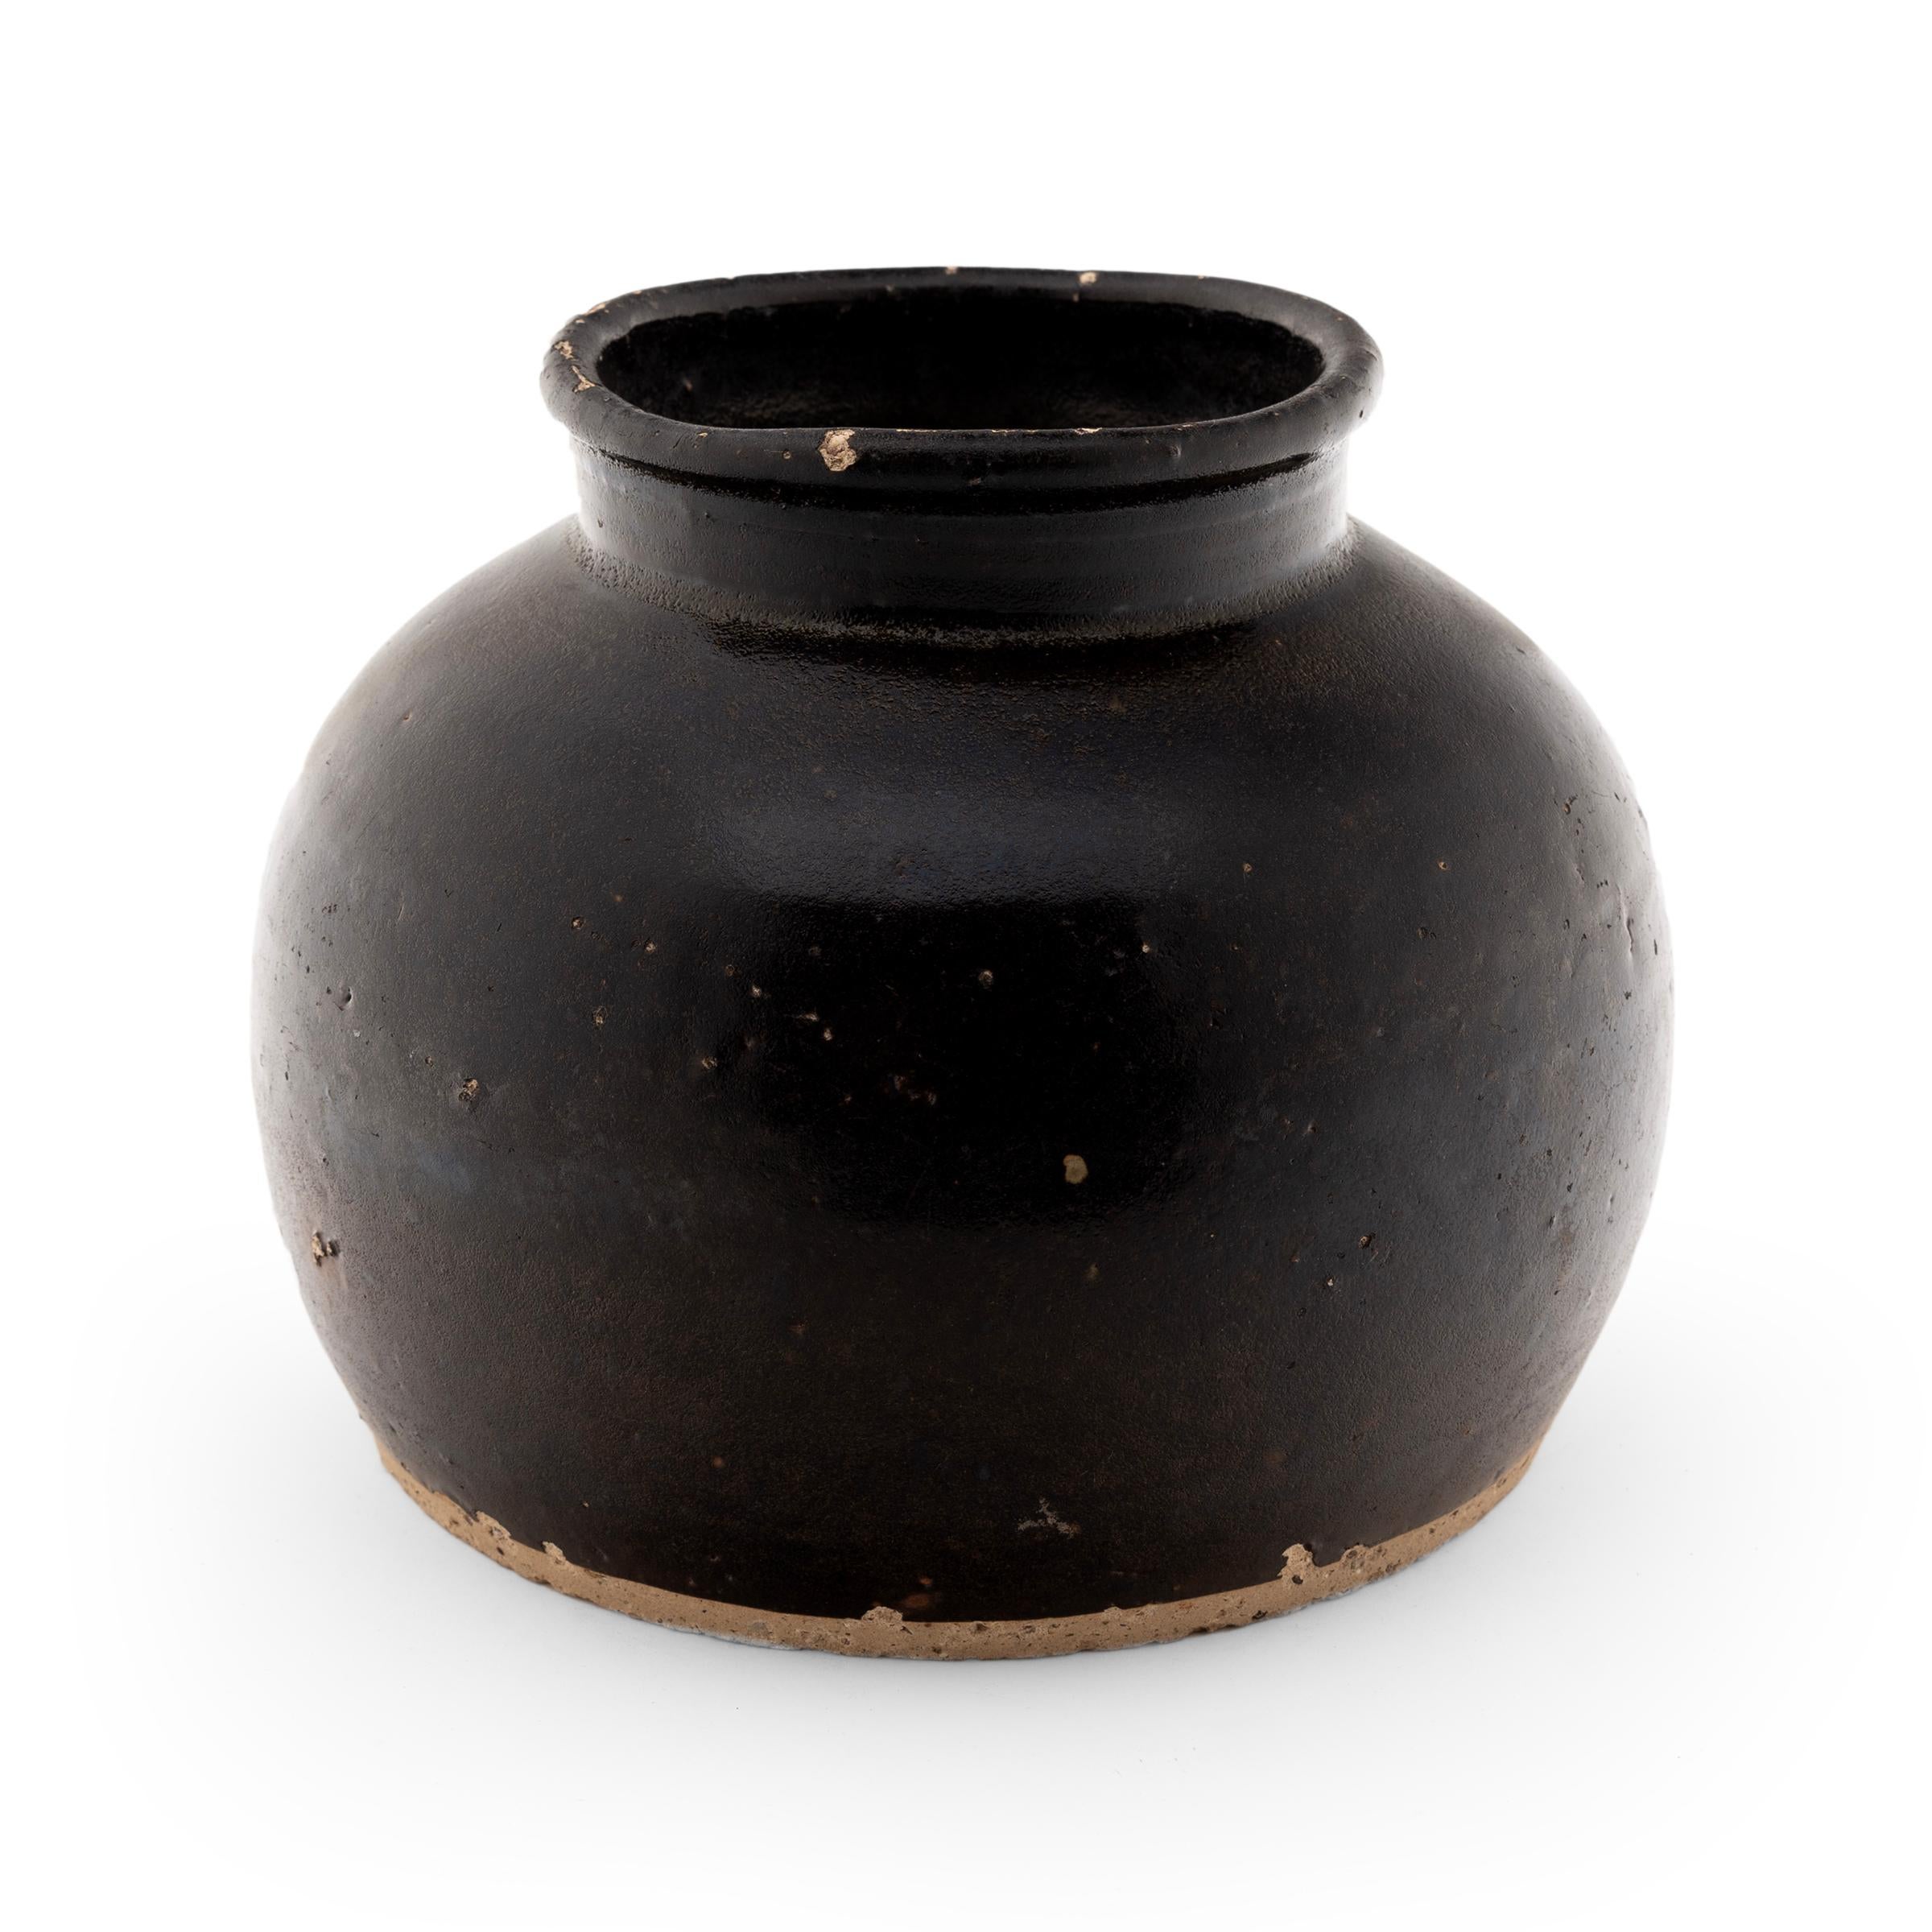 Crafted in the early 20th century, this small glazed jar was once used in a Qing-dynasty kitchen to store vinegar, wine or condiments, as evidenced by its narrow neck and interior glaze. In contrast to its unfinished base, the jar boasts a thick,